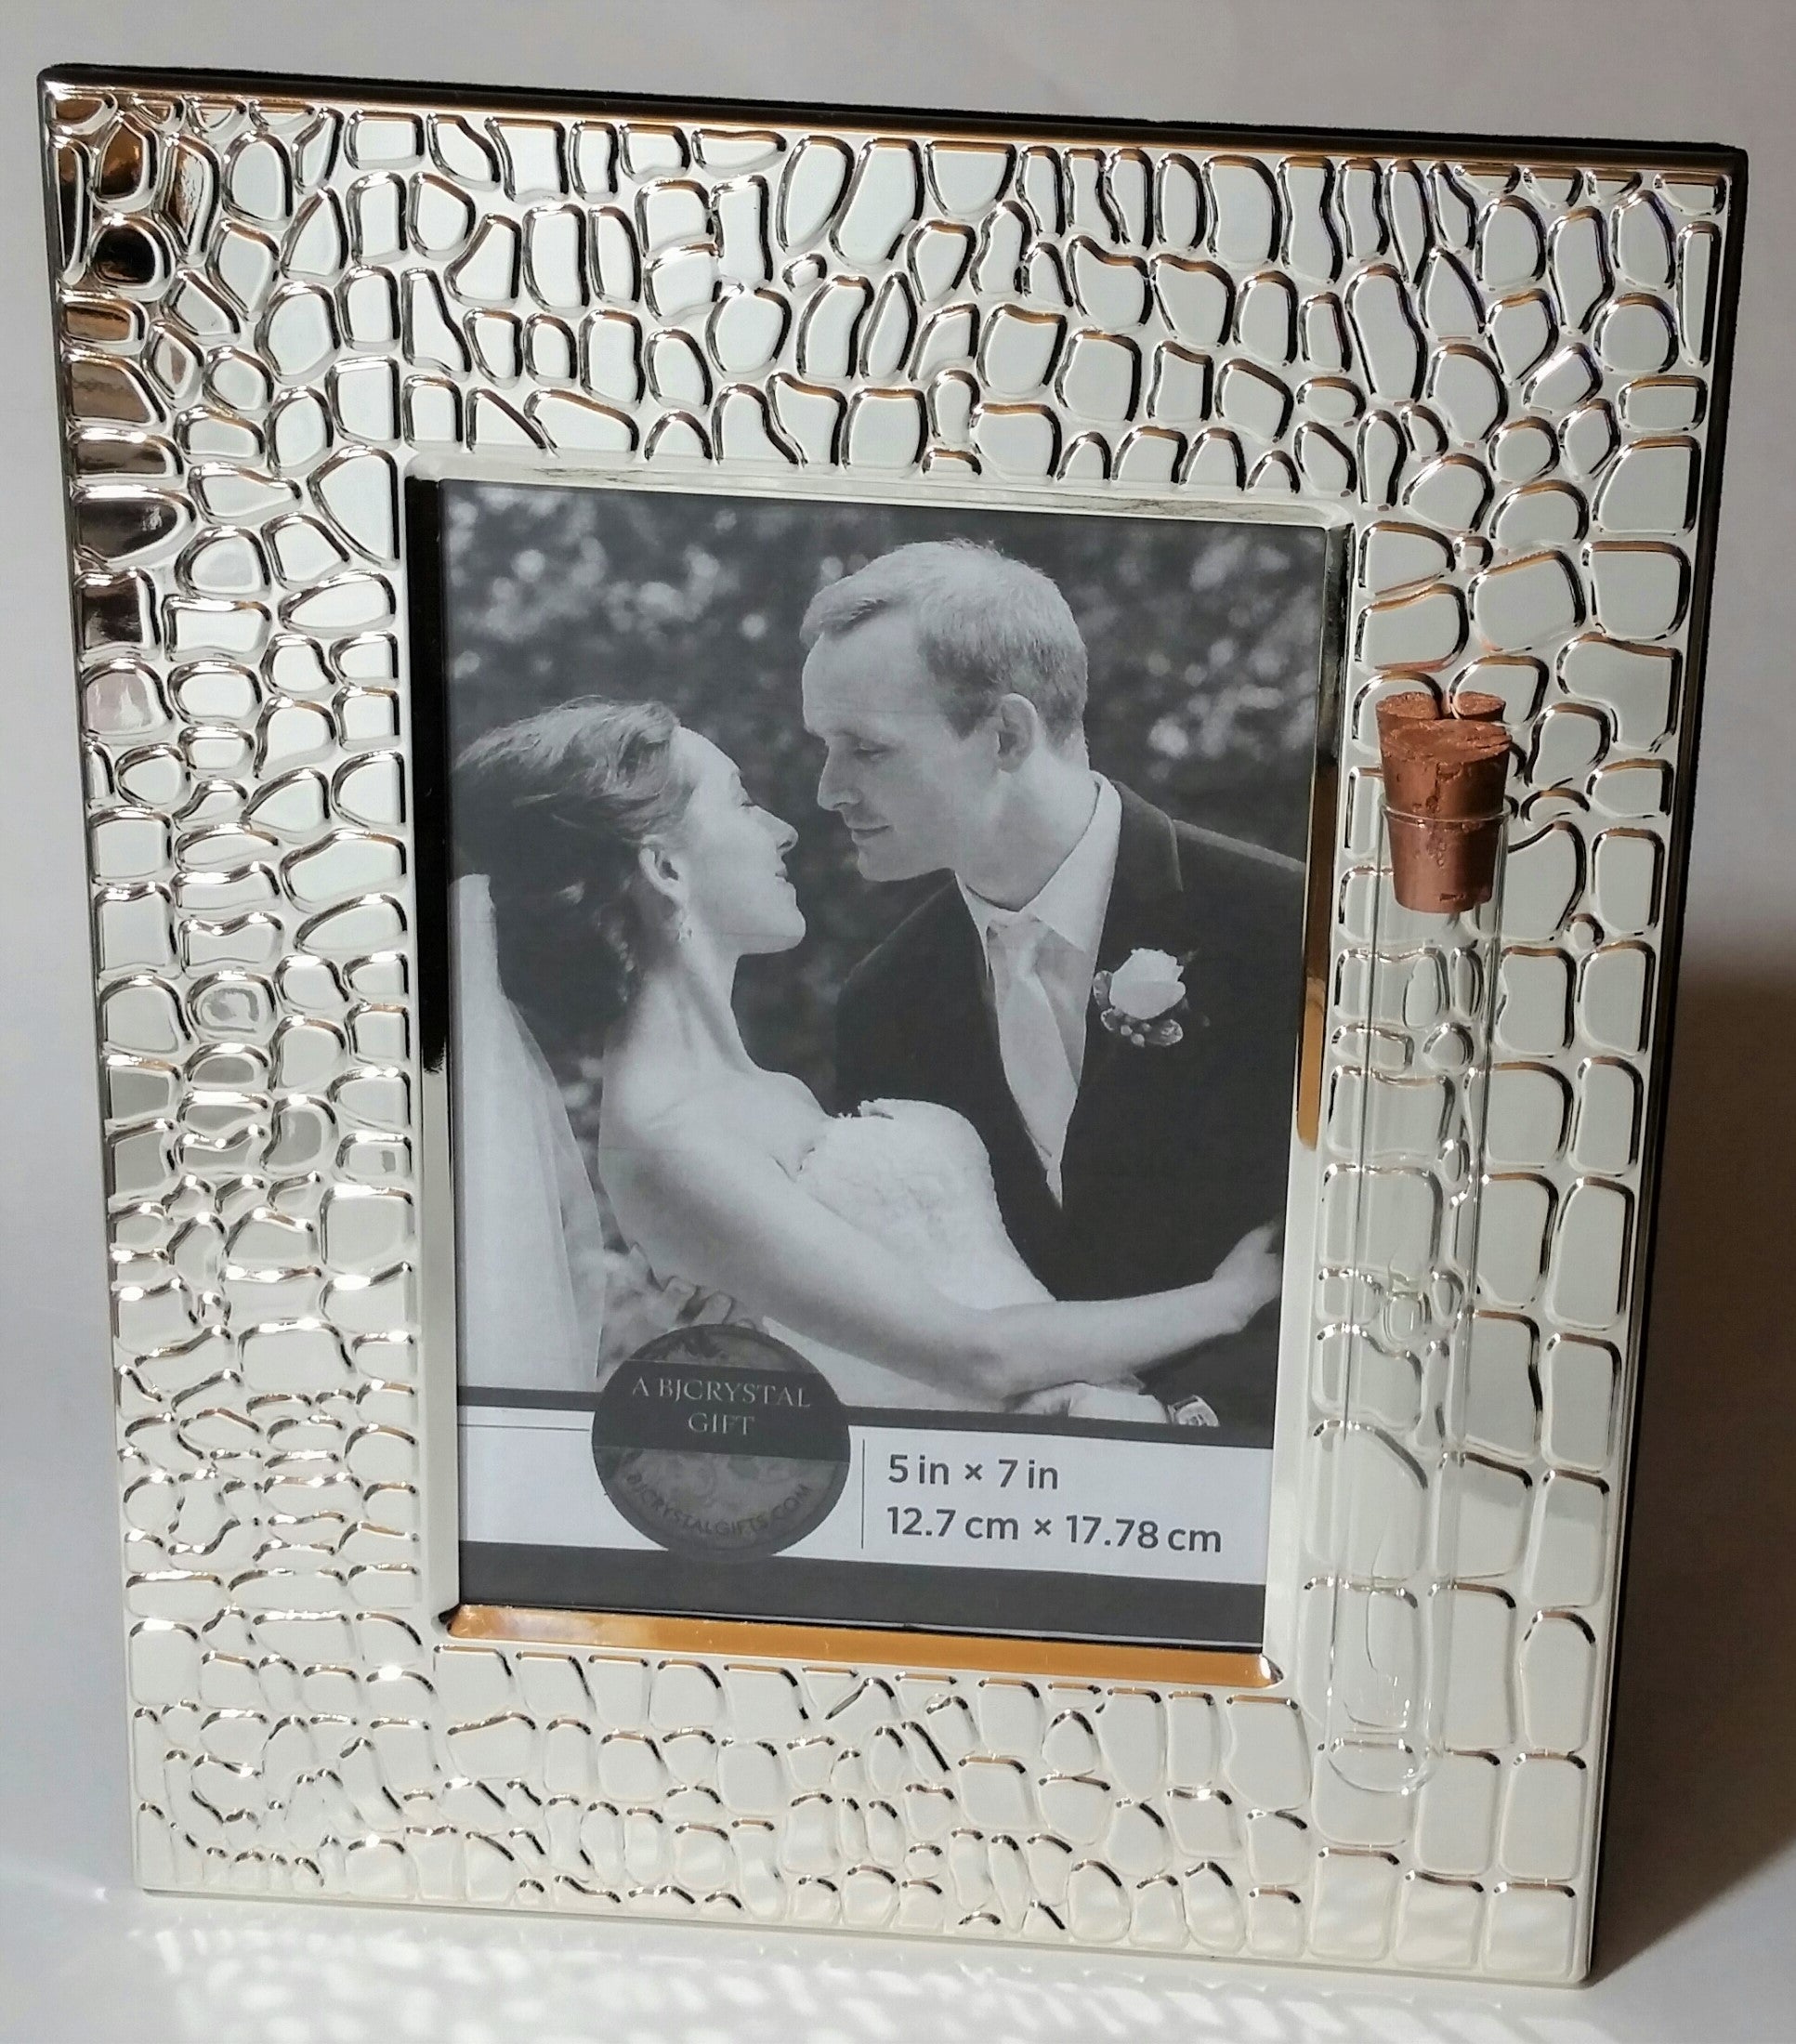 Jewish Wedding Picture Frame - Jewish Engagement Gift - 5x7 picture - Holds Shards From Chuppah